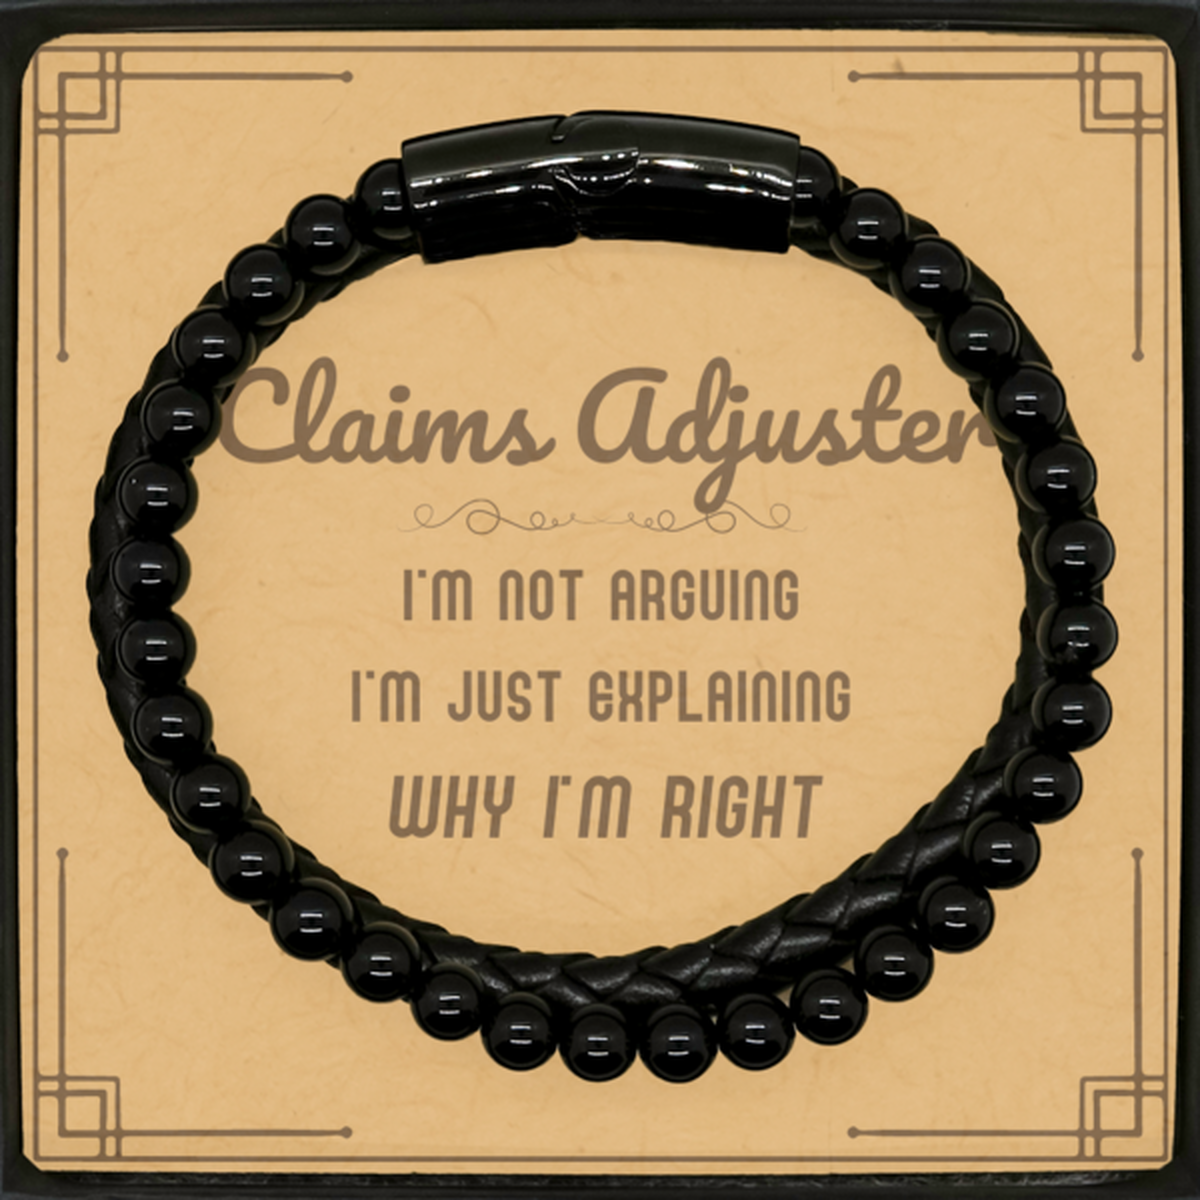 Claims Adjuster I'm not Arguing. I'm Just Explaining Why I'm RIGHT Stone Leather Bracelets, Funny Saying Quote Claims Adjuster Gifts For Claims Adjuster Message Card Graduation Birthday Christmas Gifts for Men Women Coworker